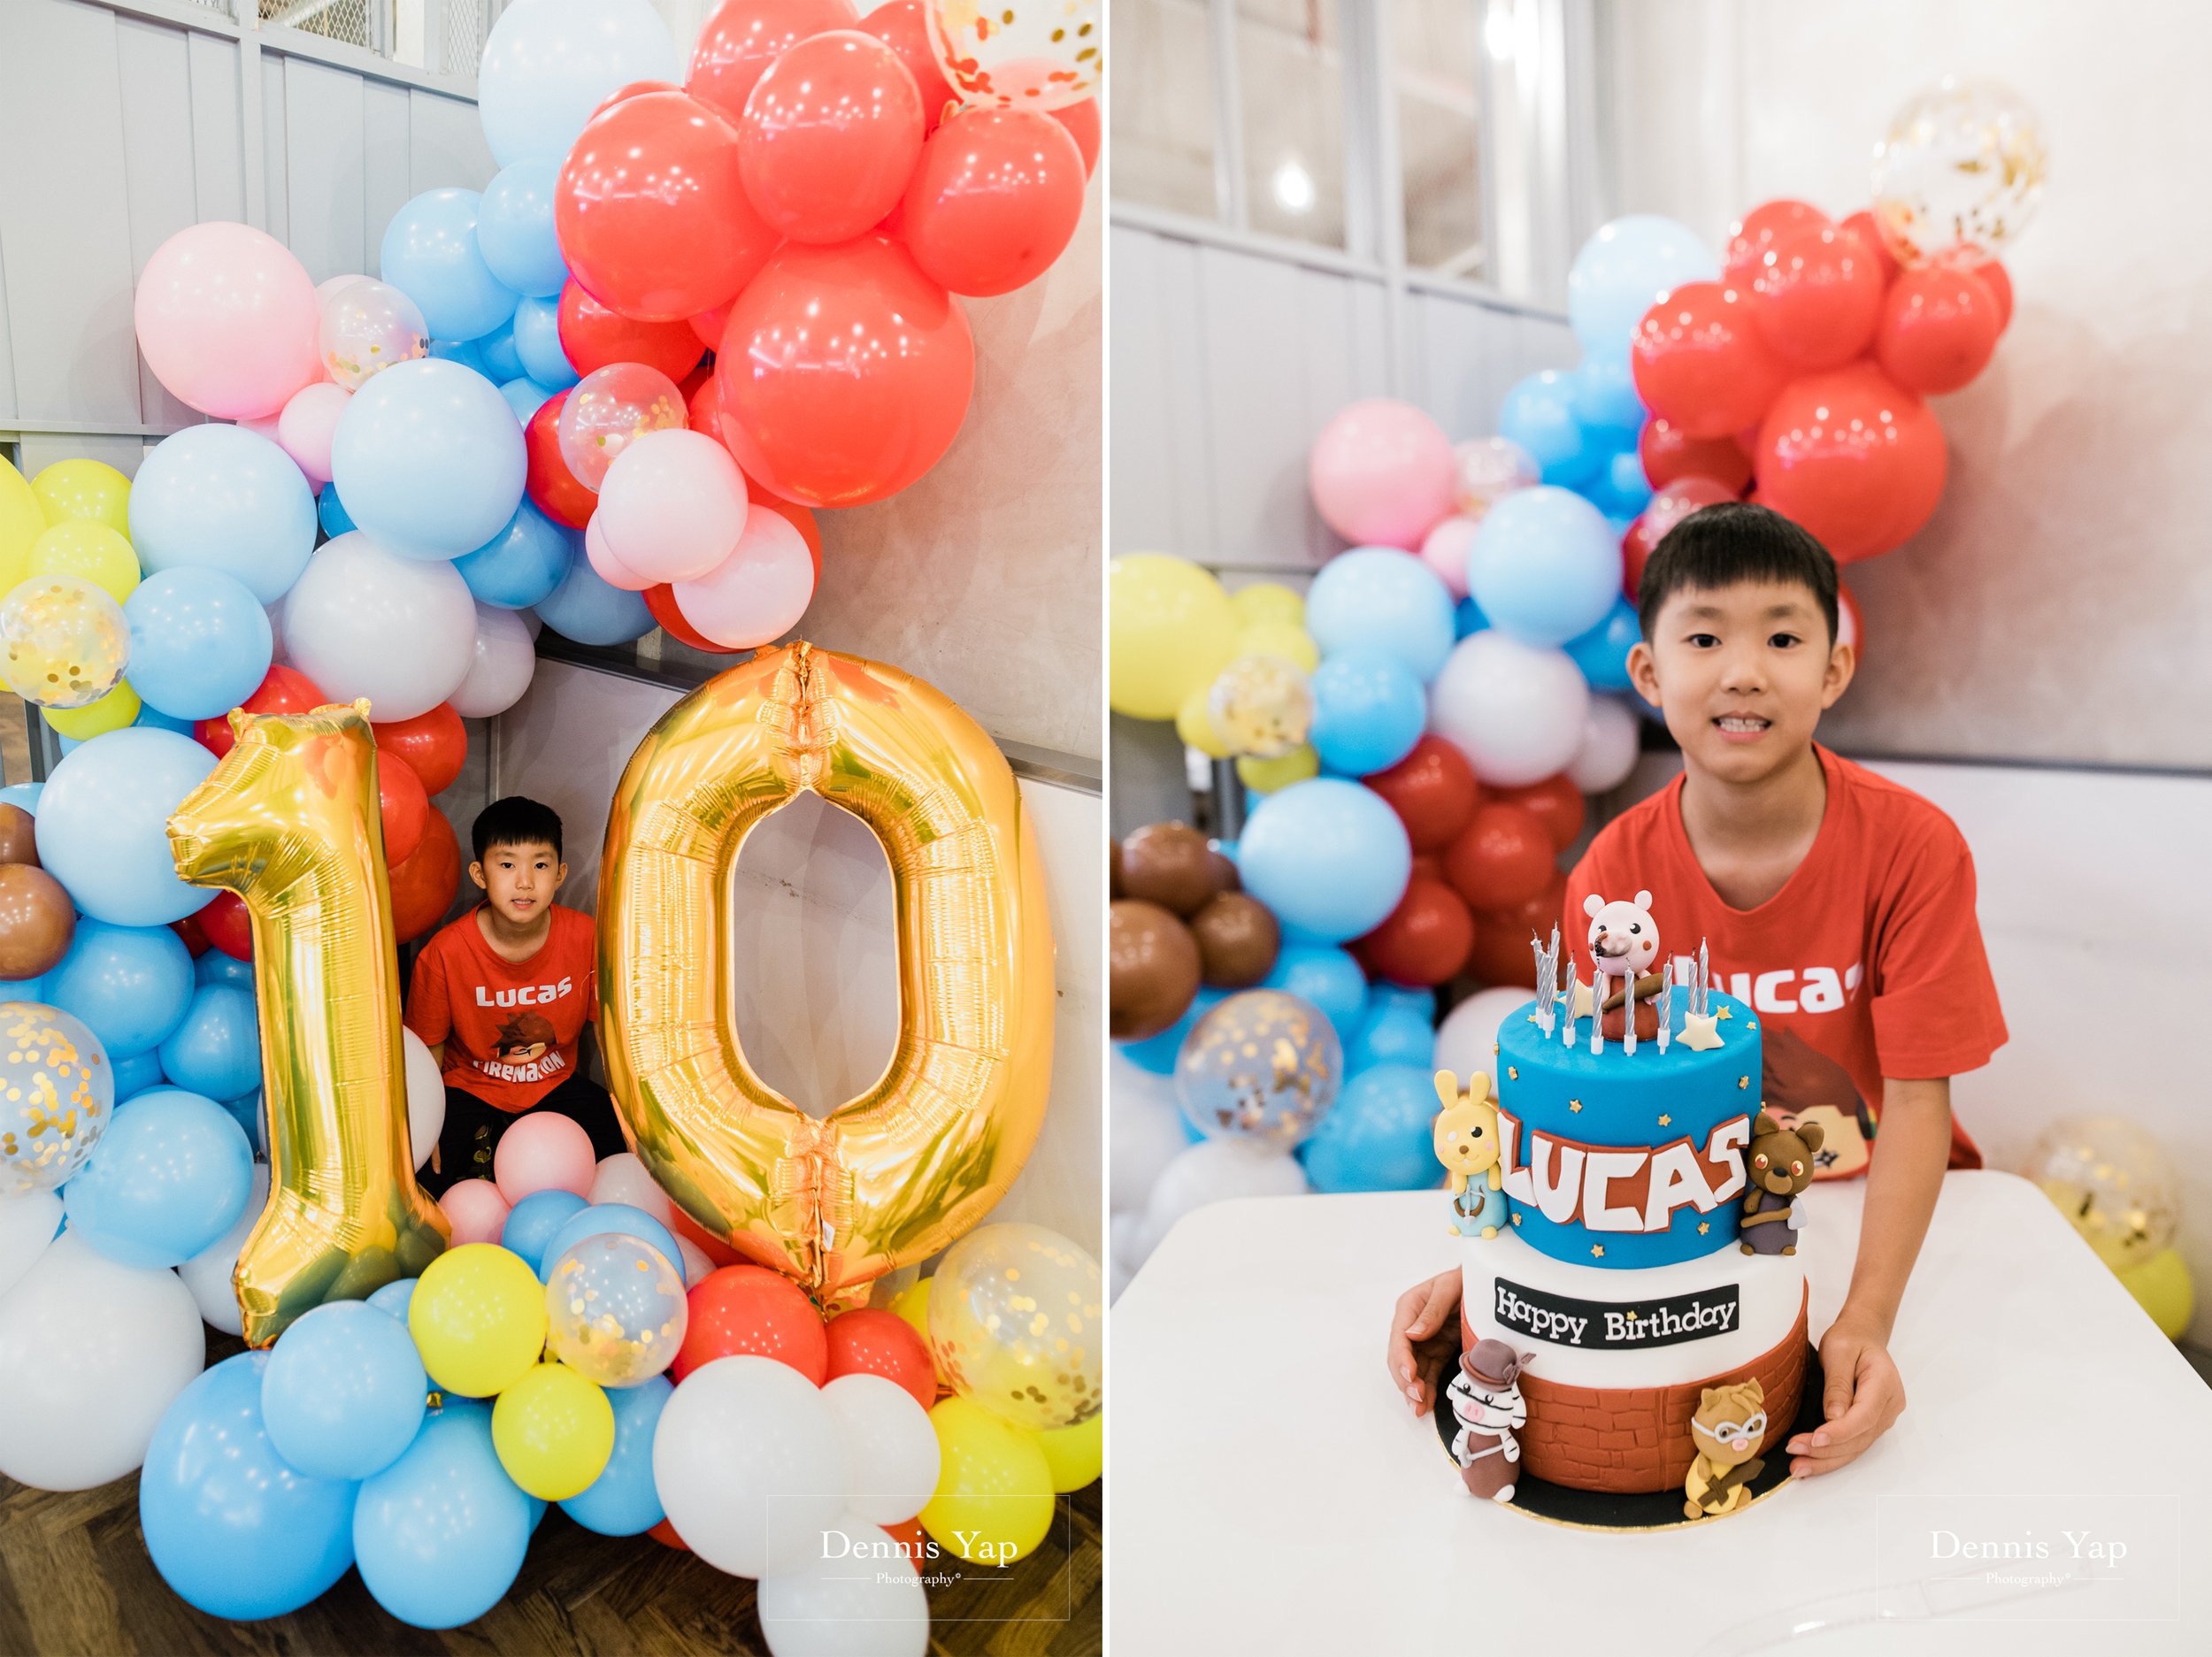 lucua 10 year old birthday party mid valley the gardens dennis yap photography covid19-14.jpg